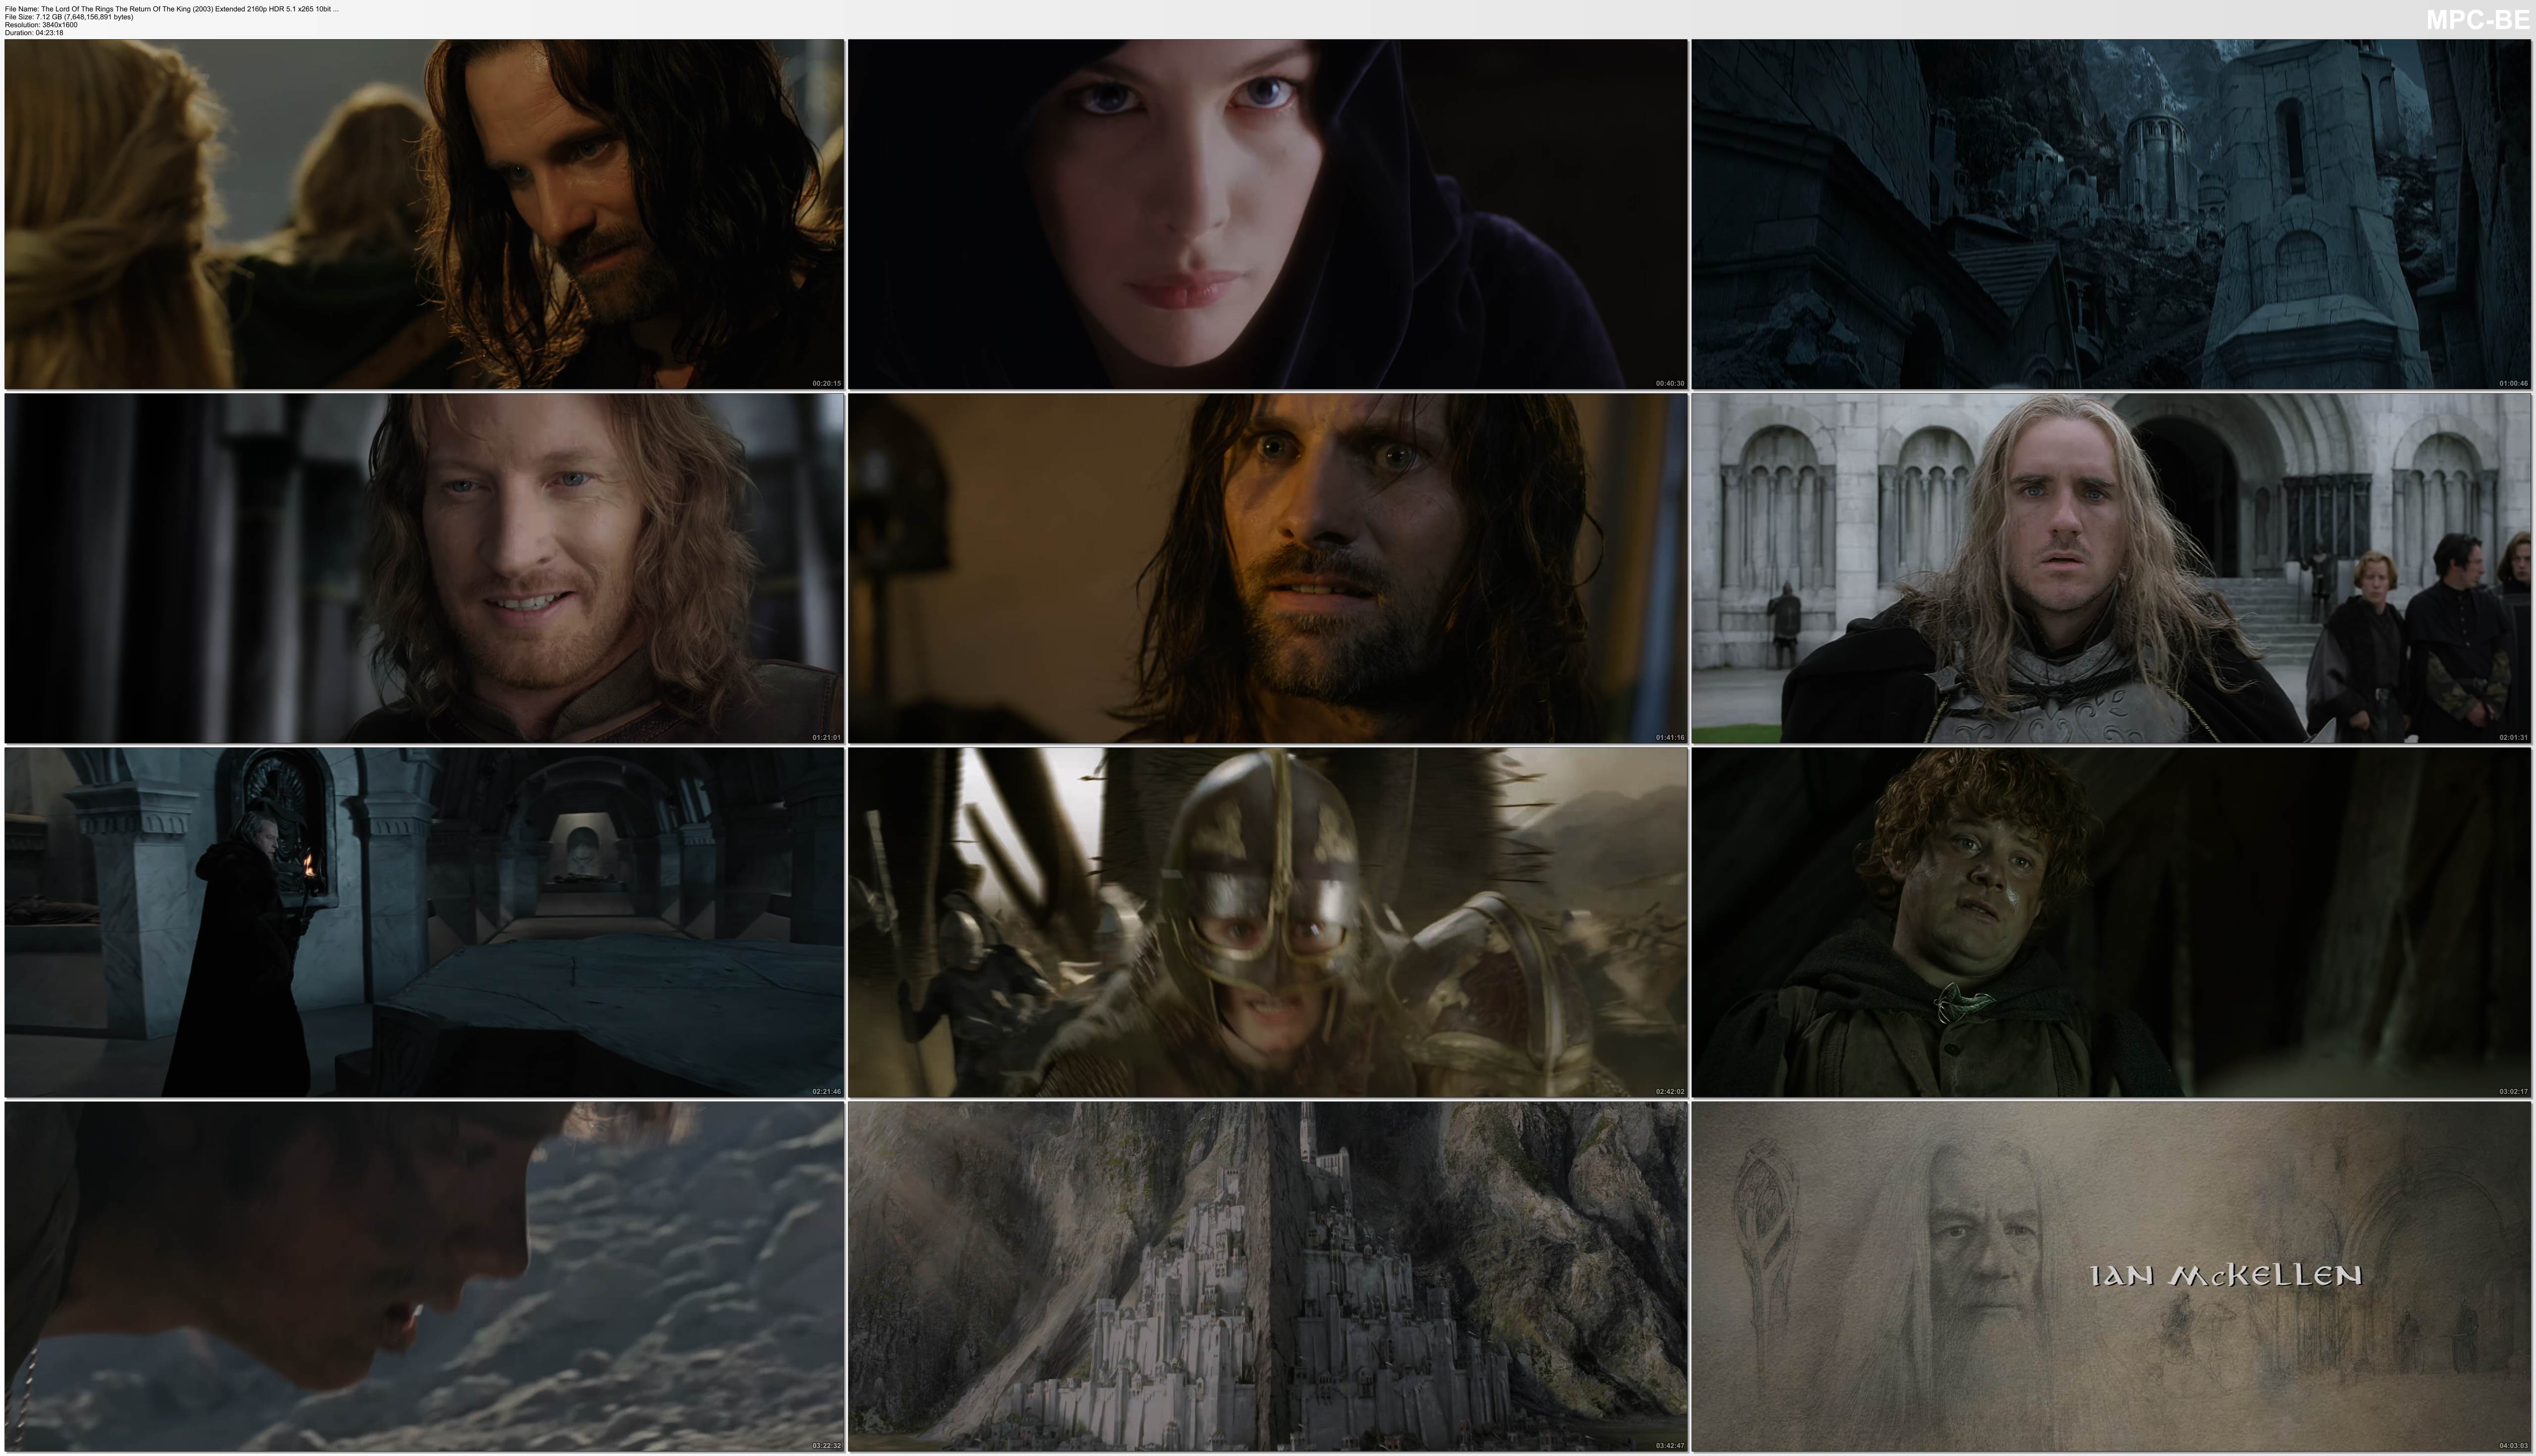 The Lord Of The Rings The Return Of The King 2003 Extended 2160p HDR 5 1 x265 10bit Phun Psyz